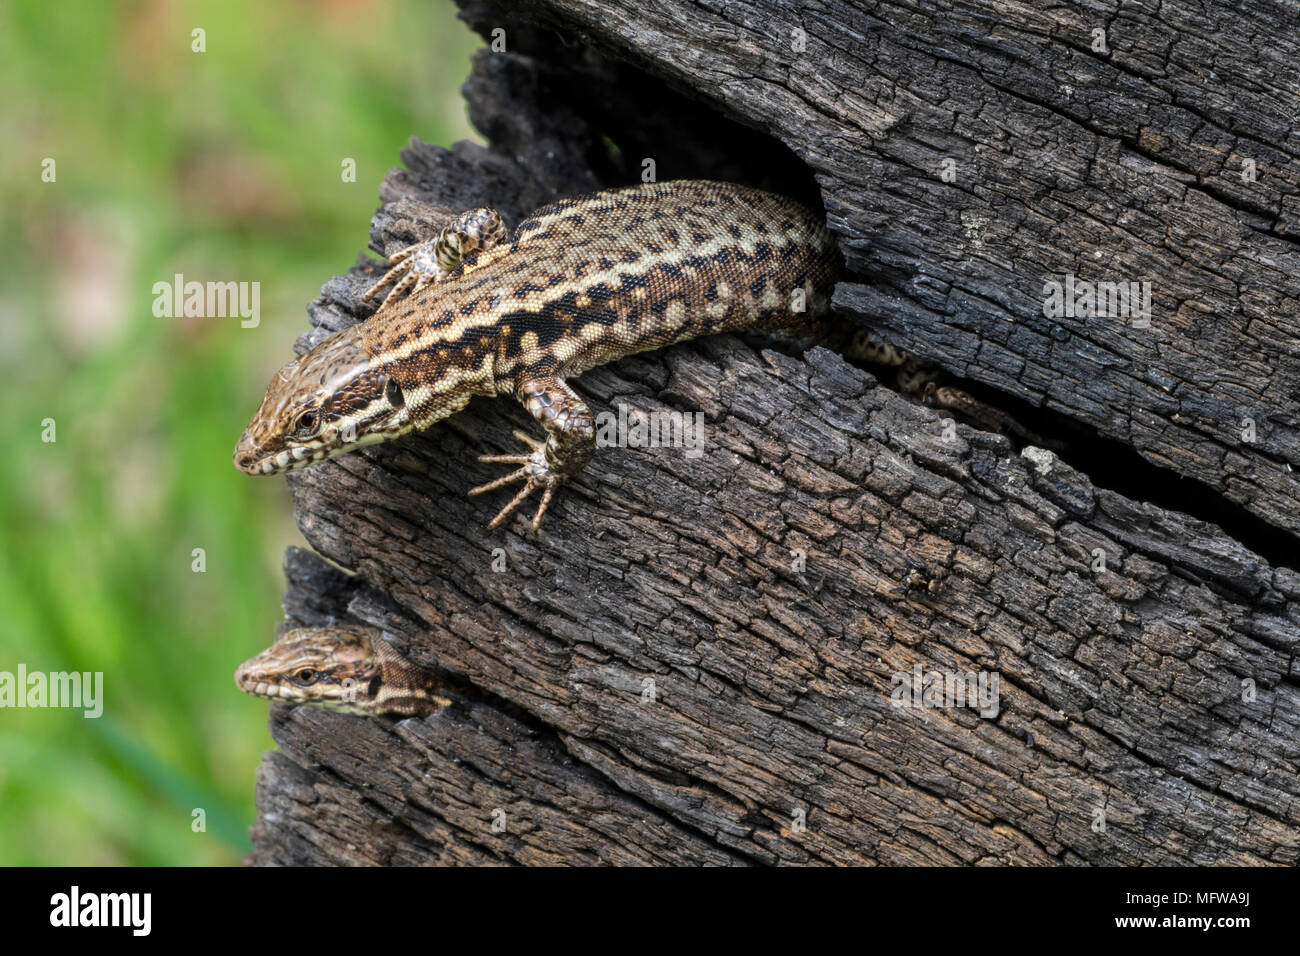 Two common wall lizards (Podarcis muralis / Lacerta muralis) emerging from gaps in scorched tree trunk Stock Photo